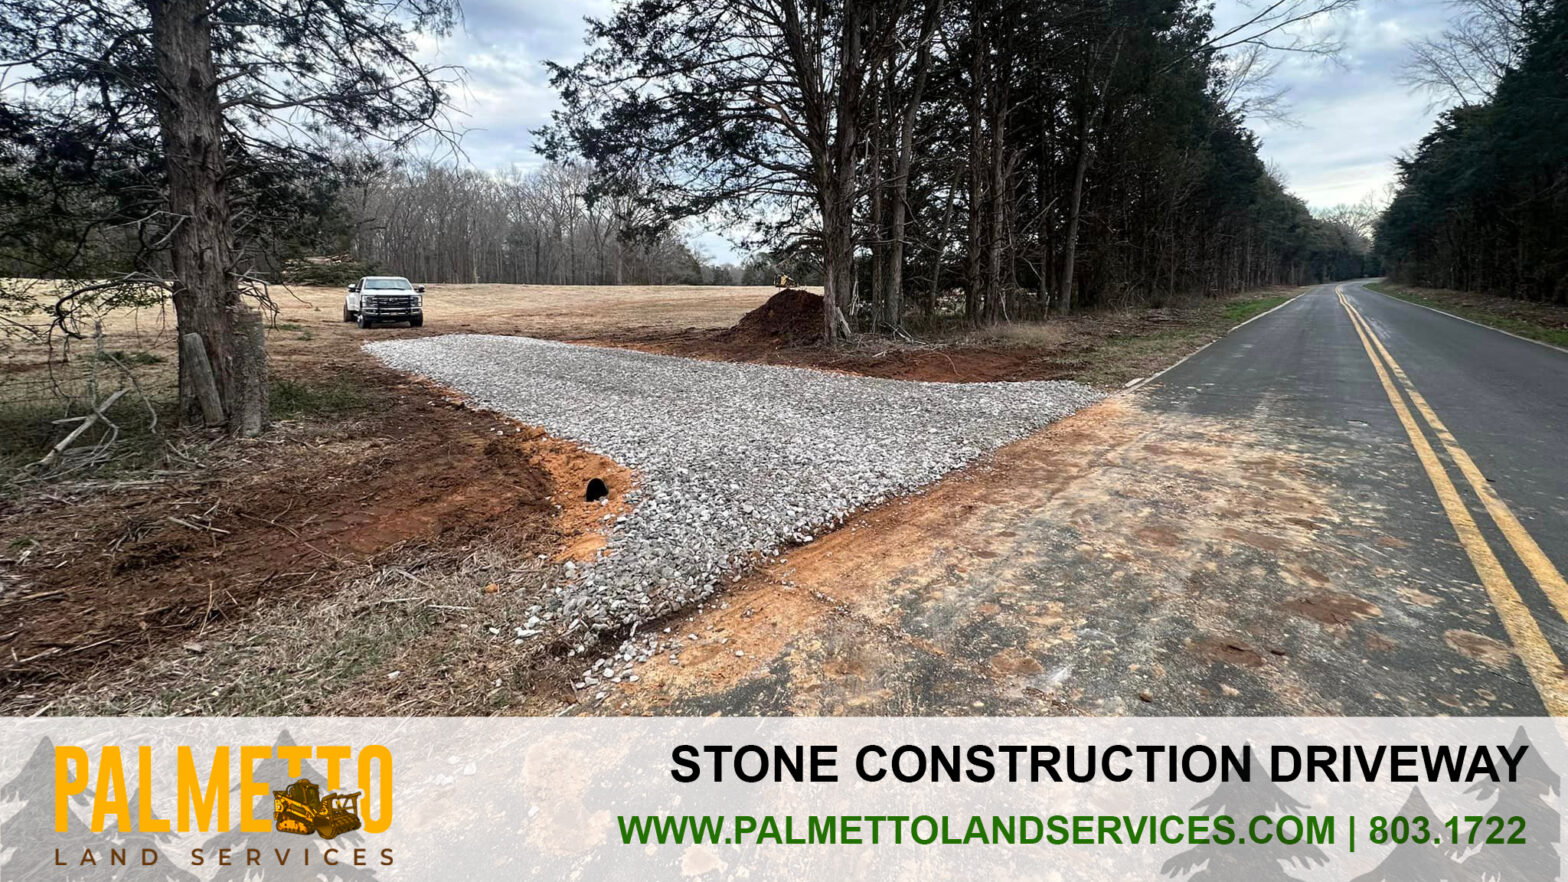 Stone Driveway for Construction Access